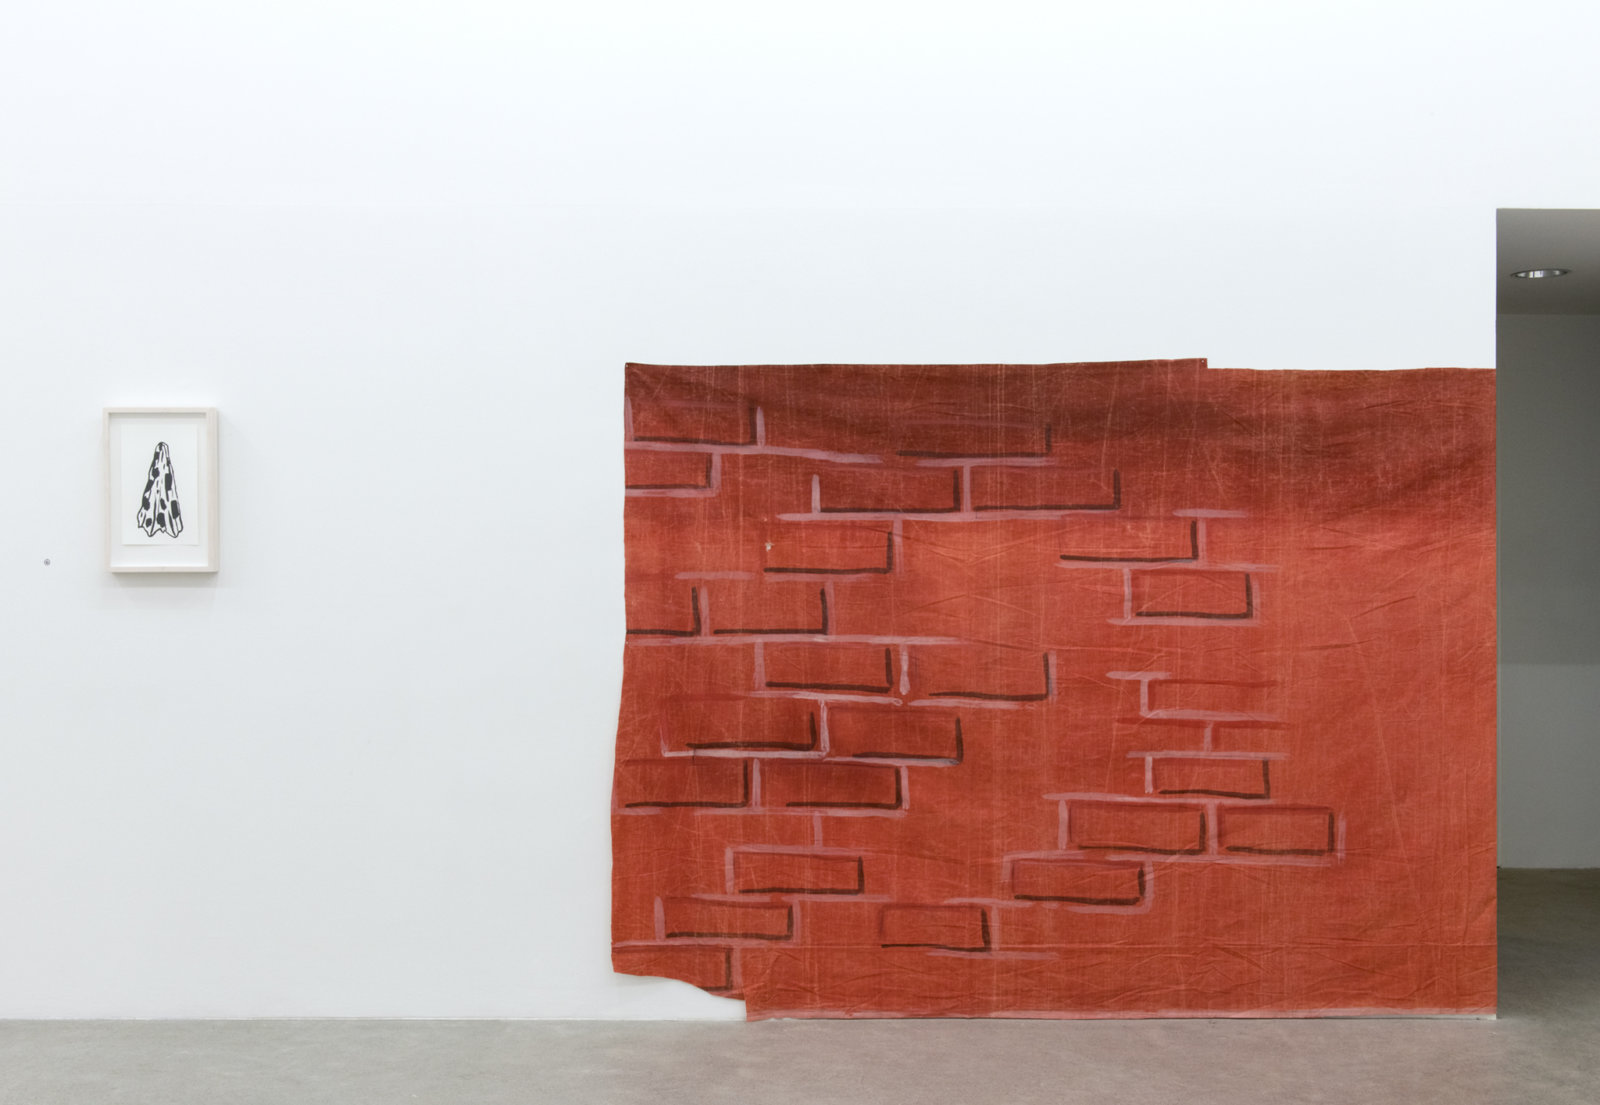 Geoffrey Farmer, LIPSTICK BRICK WITH MID VOWEL AFOUL DISH TOWEL, 2017, ink on paper, theatre backdrop (1939), backdrop: 71 x 200 in (180 x 508 cm), drawing: 18 x 12 in. (45 x 30 cm)